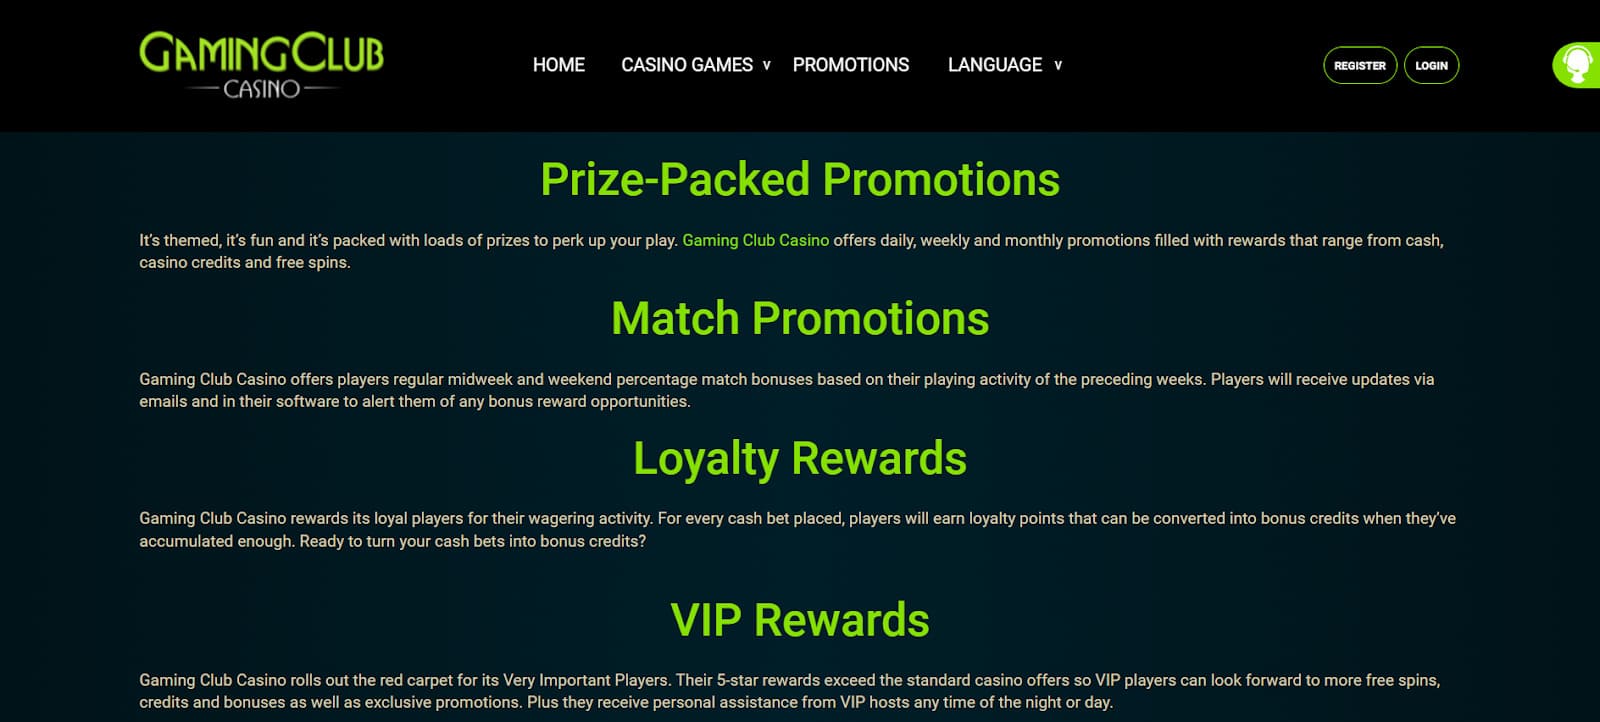 Gaming Club Casino promotions